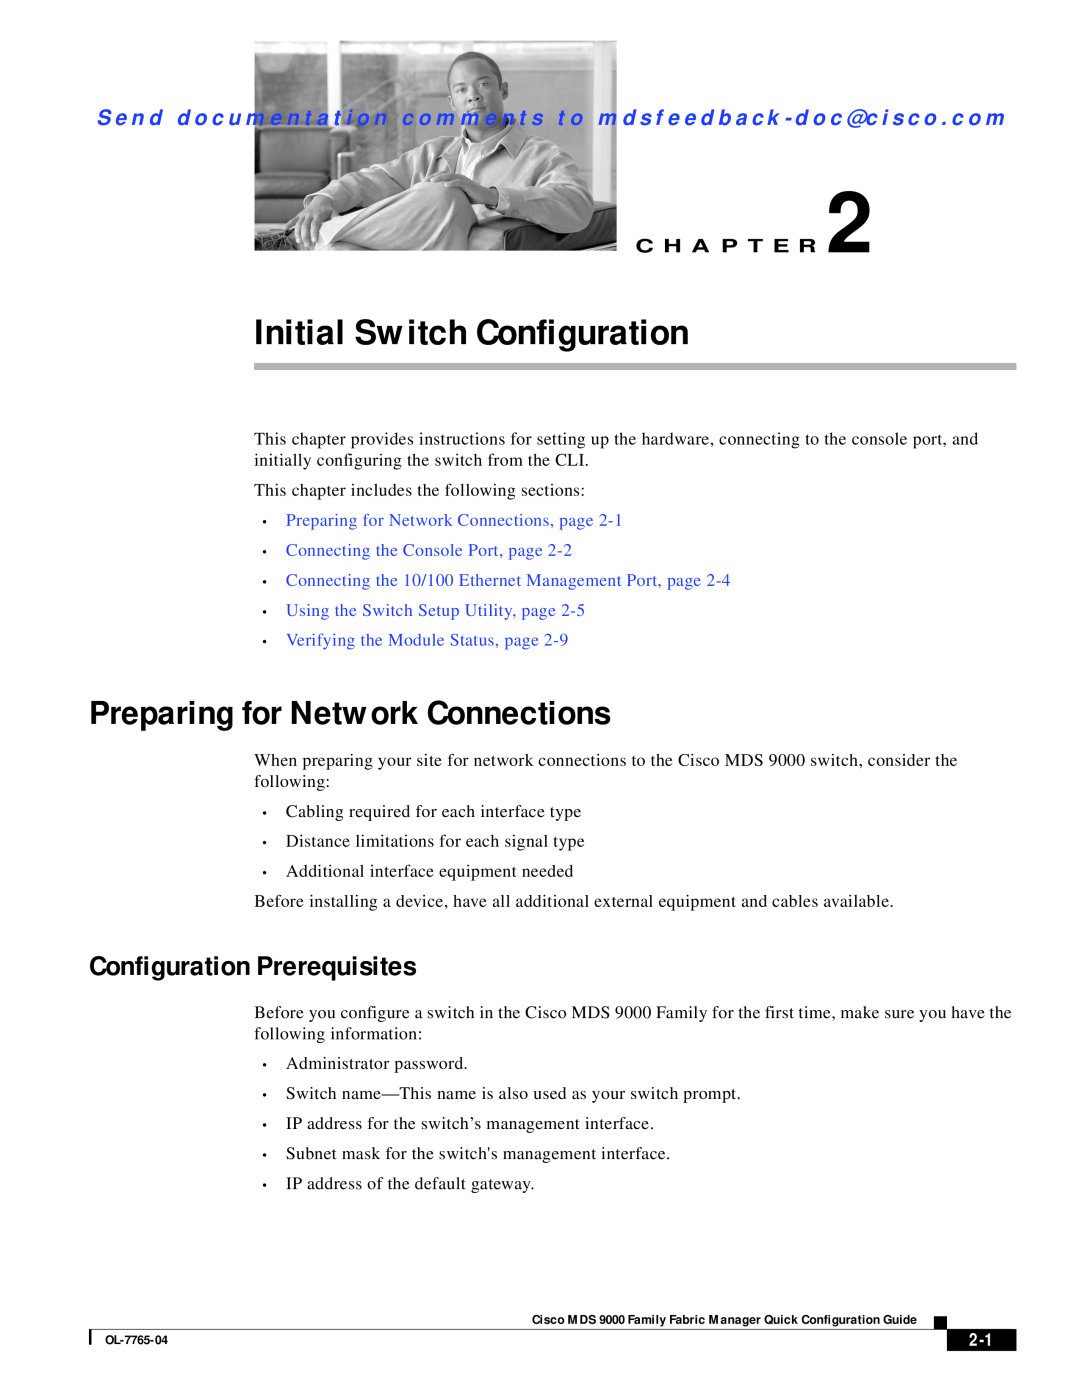 Cisco Systems OL-7765-04 manual Preparing for Network Connections, Configuration Prerequisites, C H A P T E R 